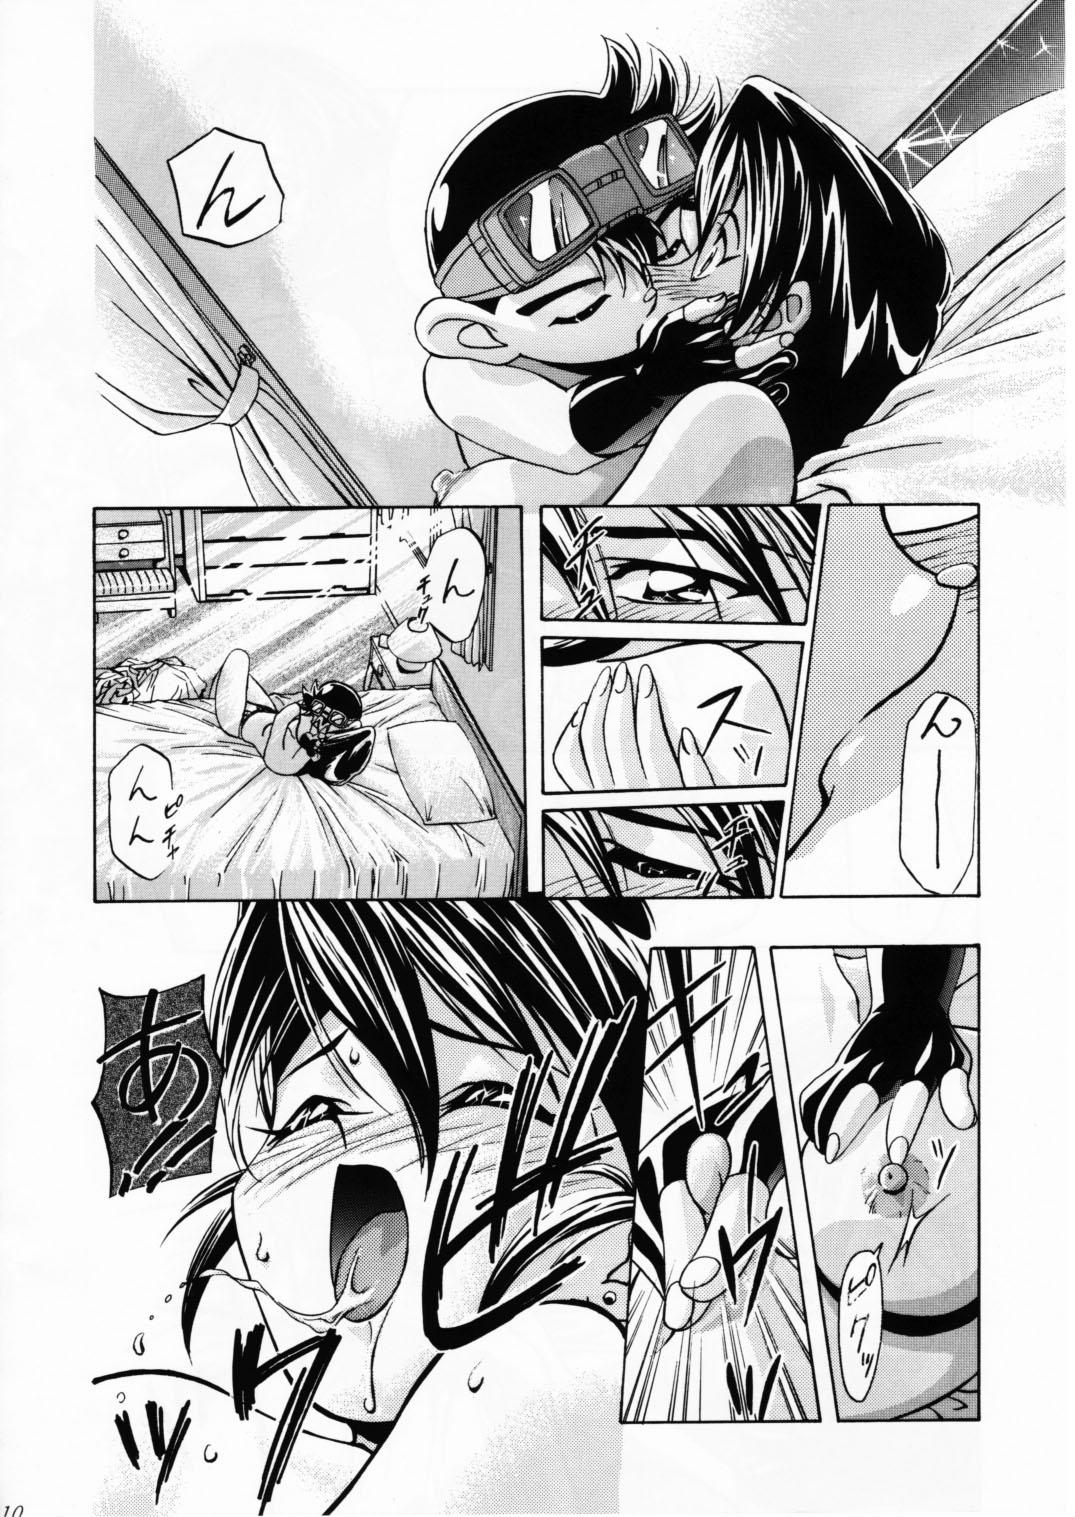 Amature Let's Ra Mix 2 LET'S GO - Bakusou kyoudai lets and go Indonesian - Page 9